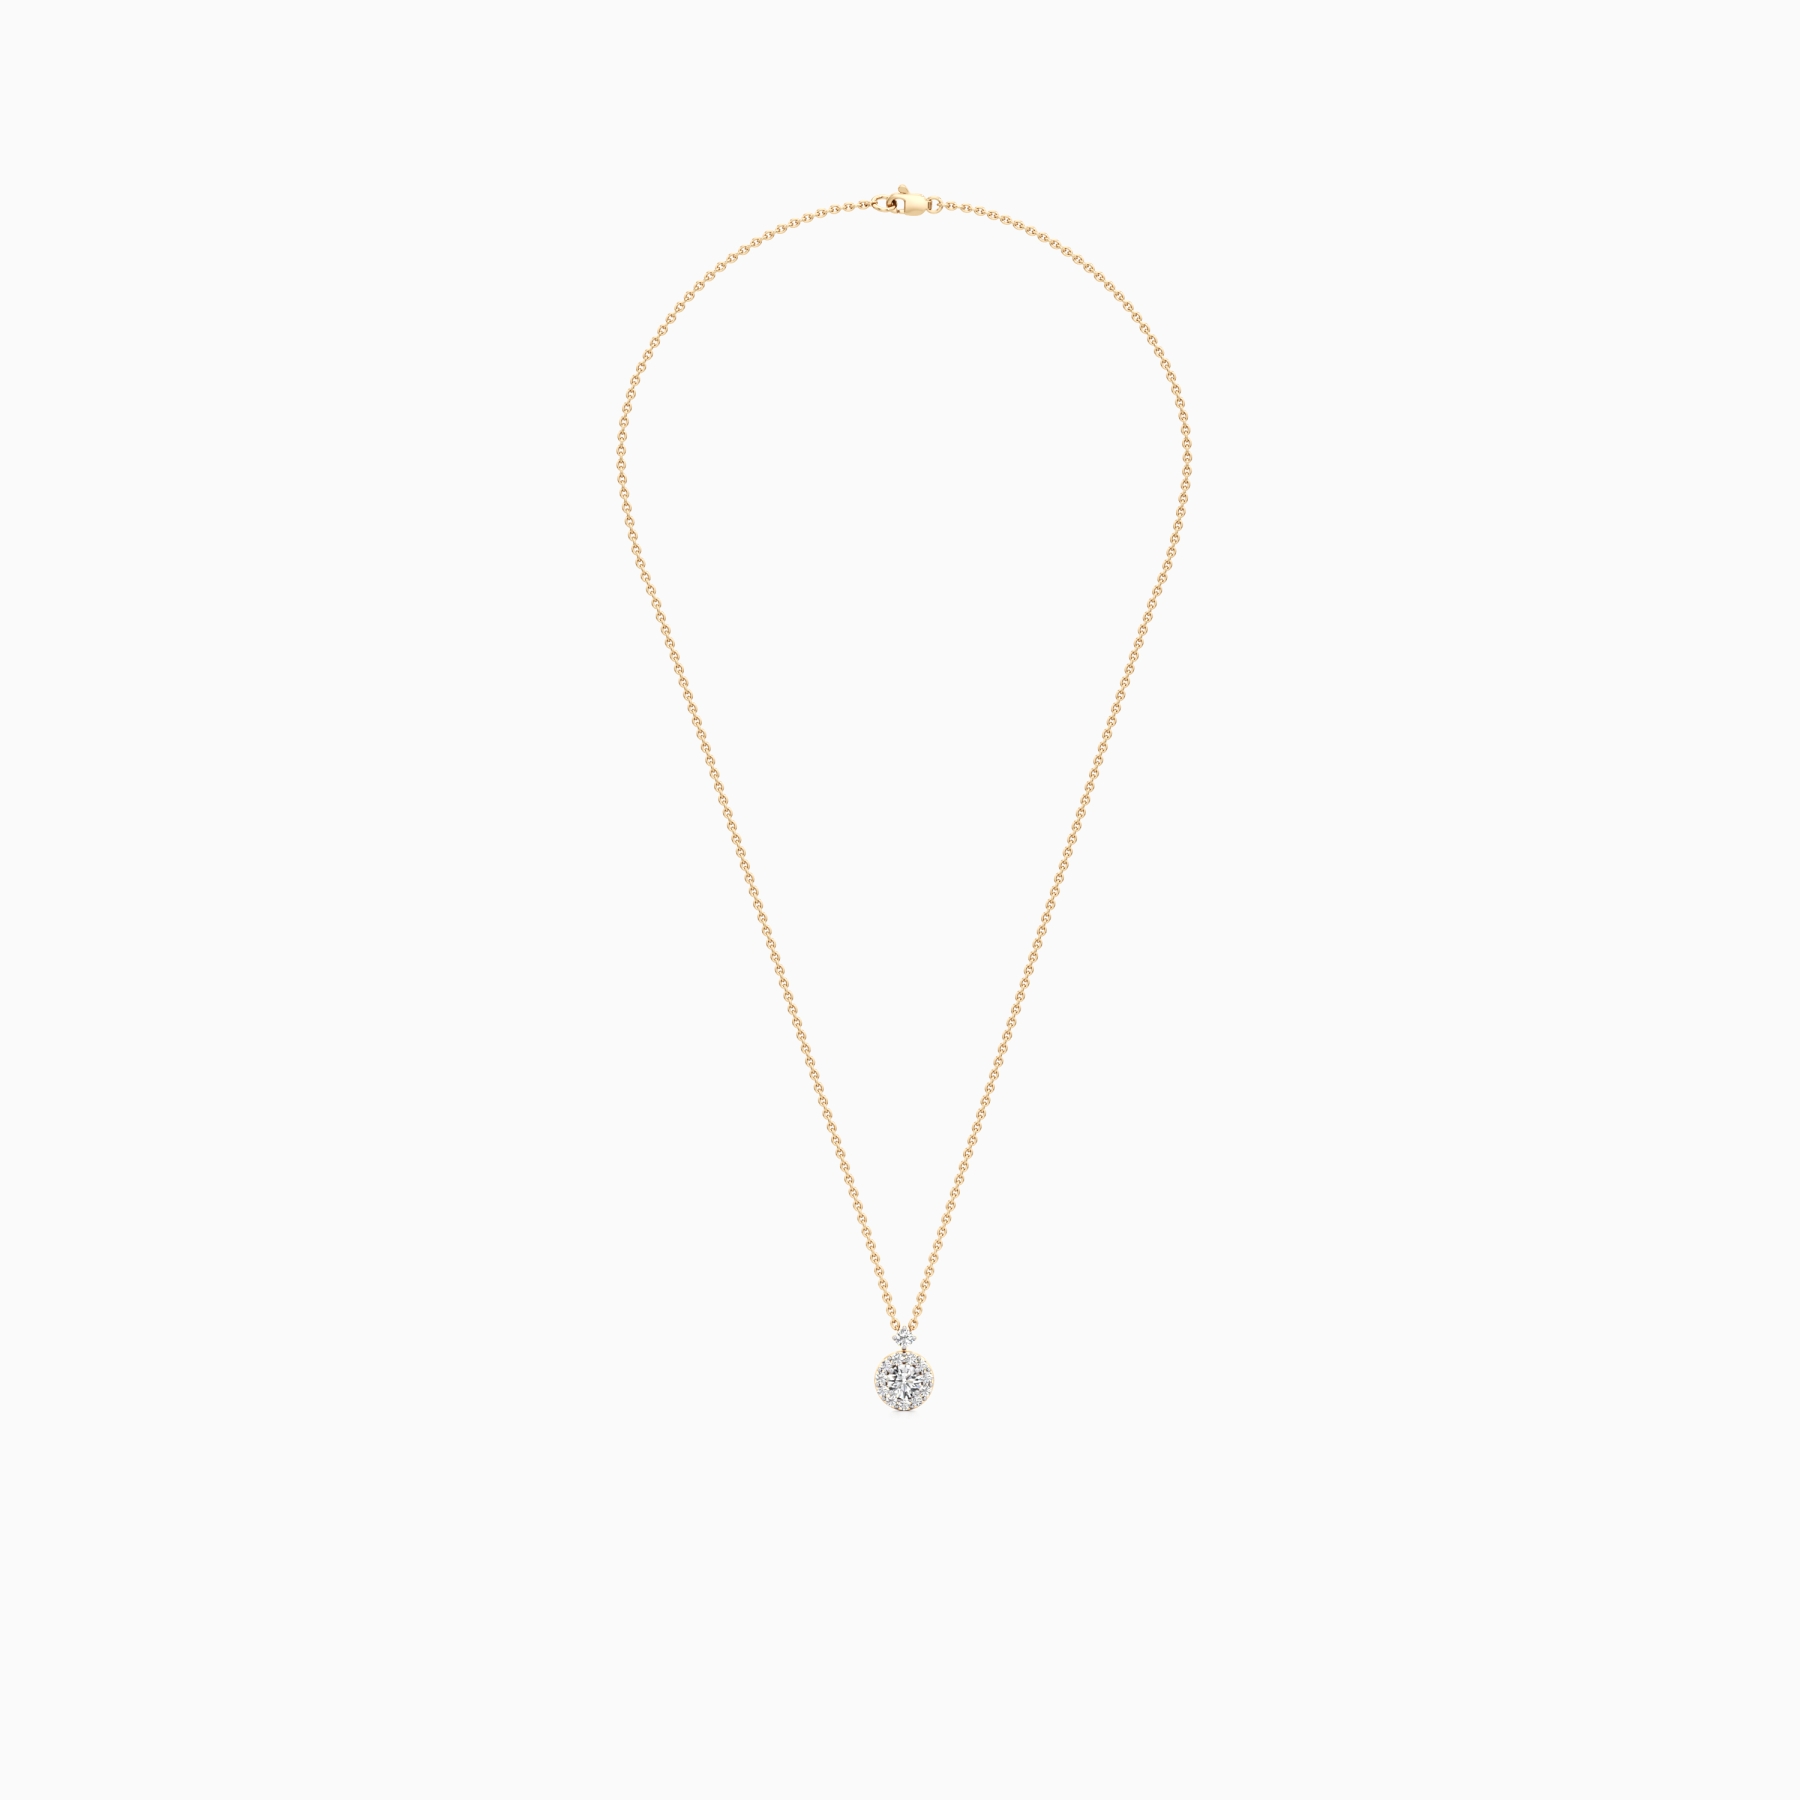 Halo of Solitaire Starlight Pendant in Yellow 14K Gold